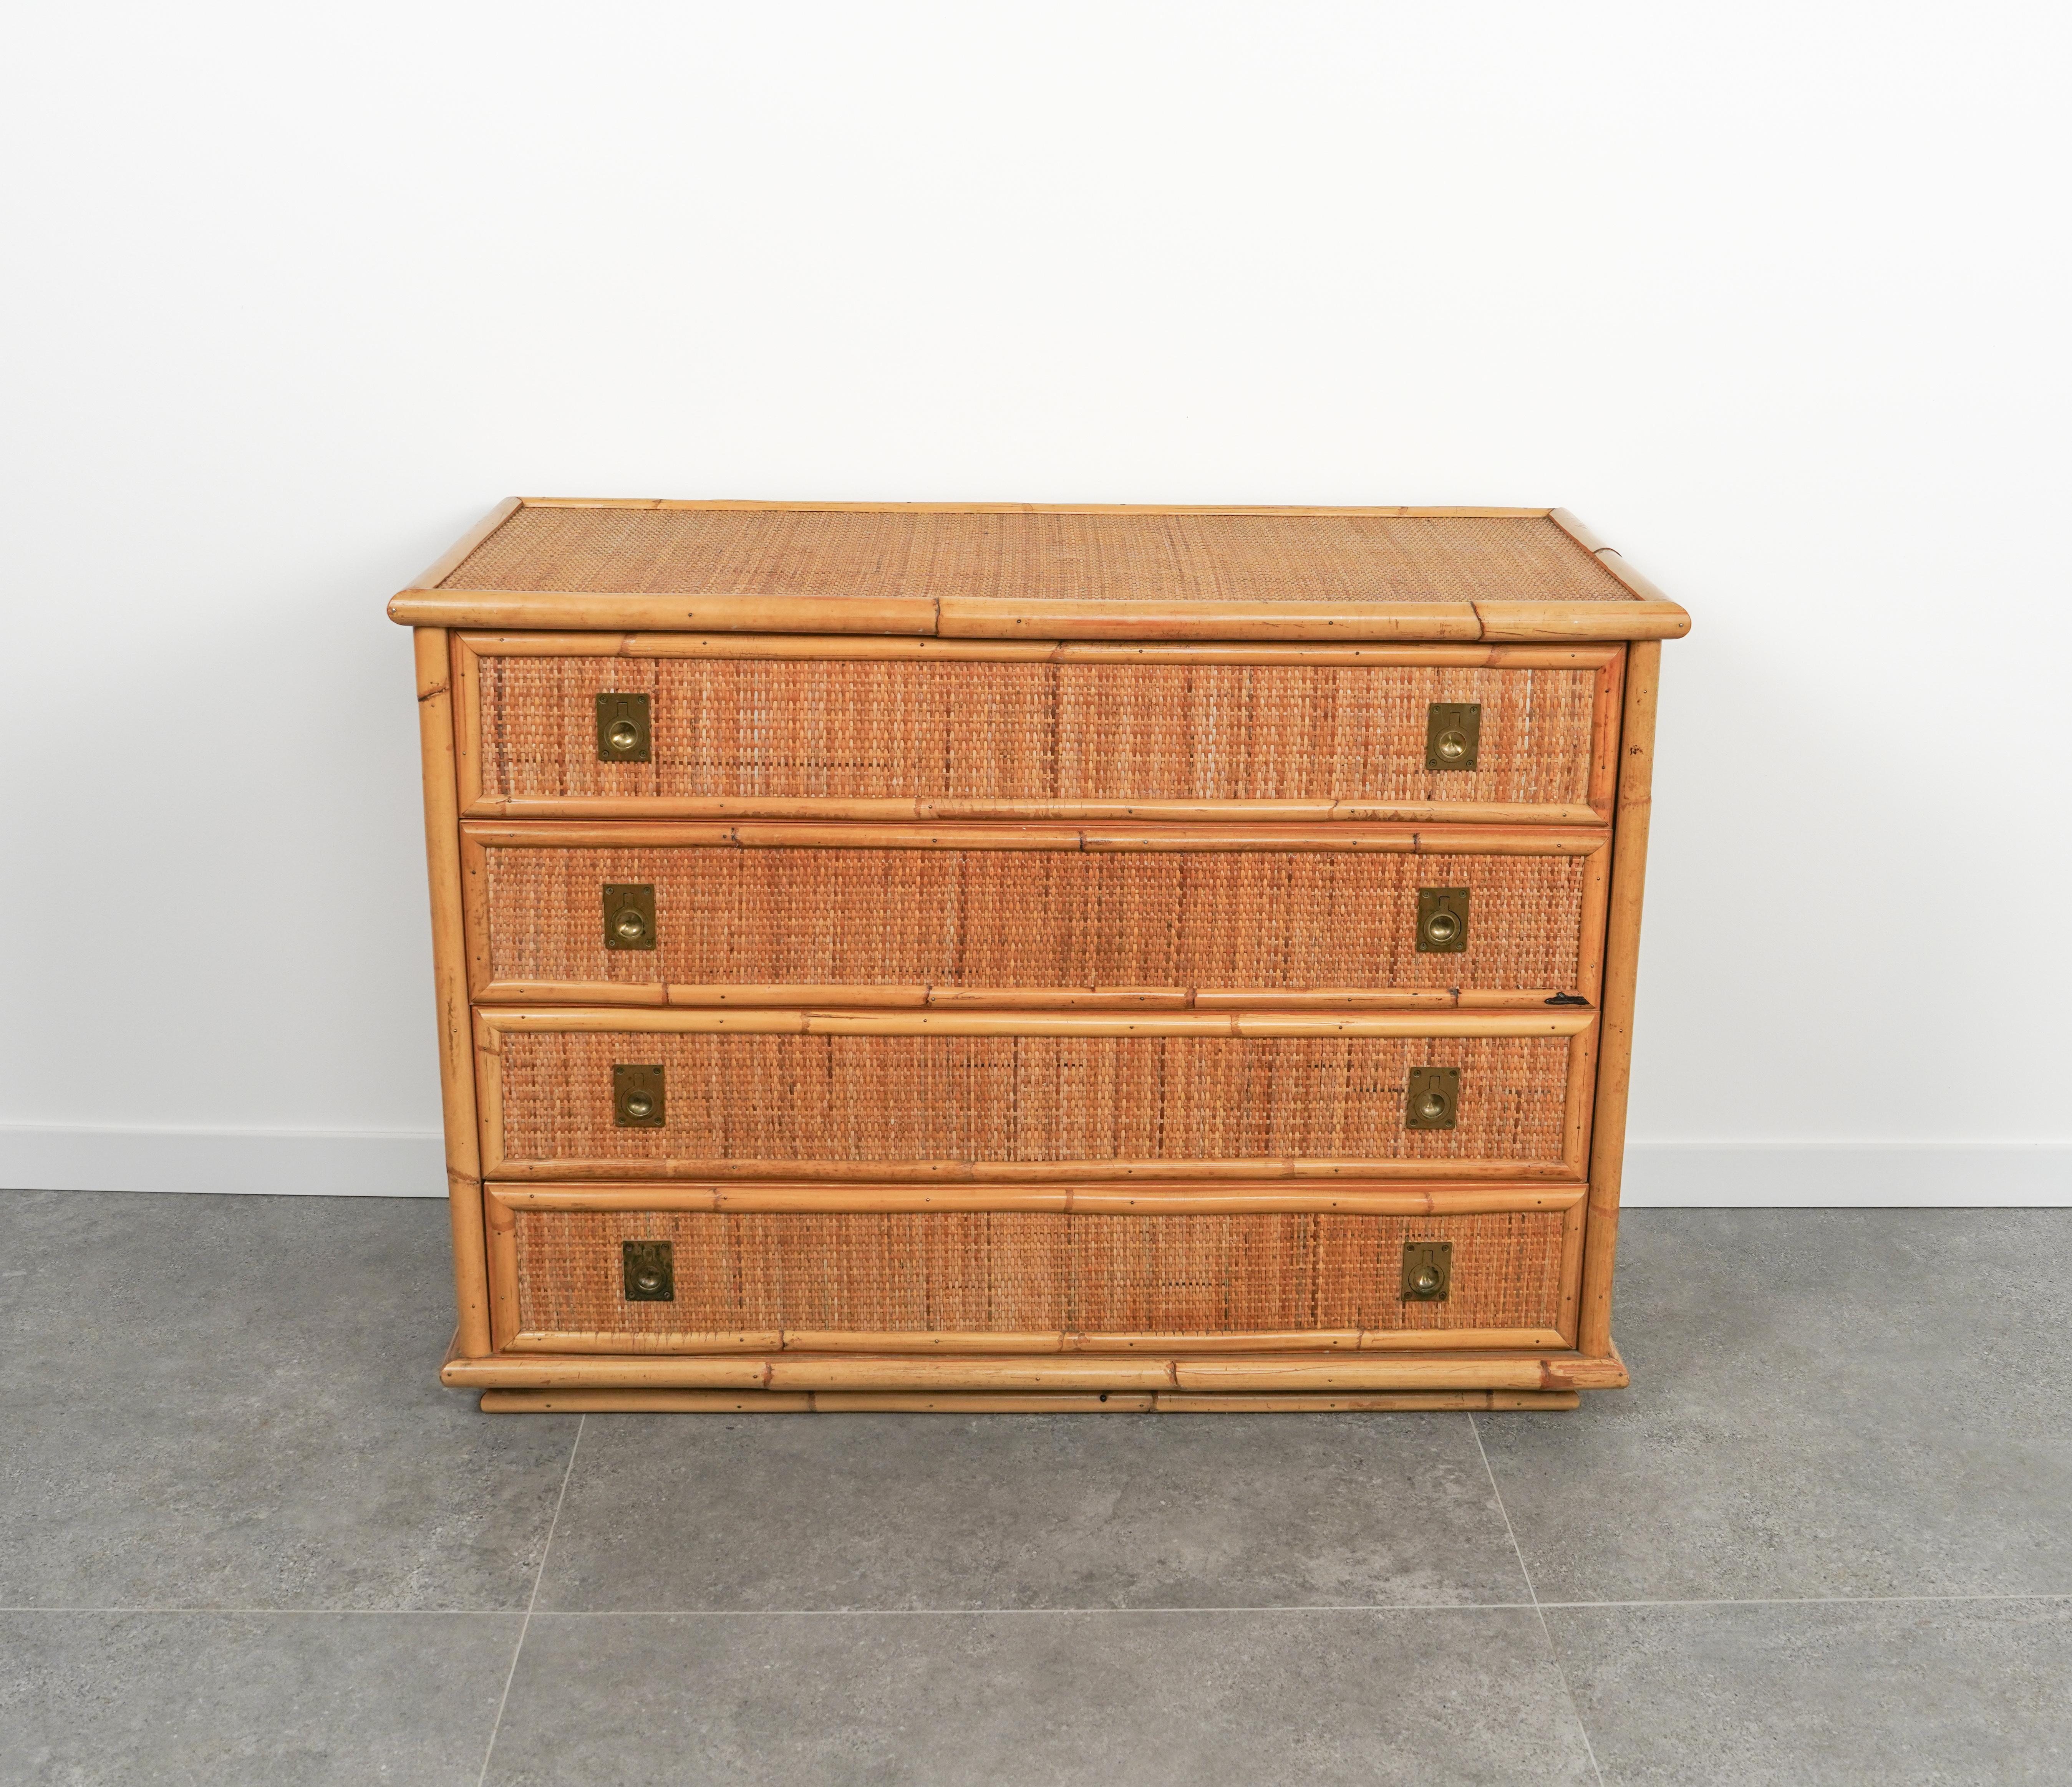 Midcentury amazing chest of drawers in bamboo, rattan, wicker and handles in brass by Dal Vera.

Made in Italy in the 1970s.

The brass handles on the drawers are lovely examples of high-quality craftsmanship.